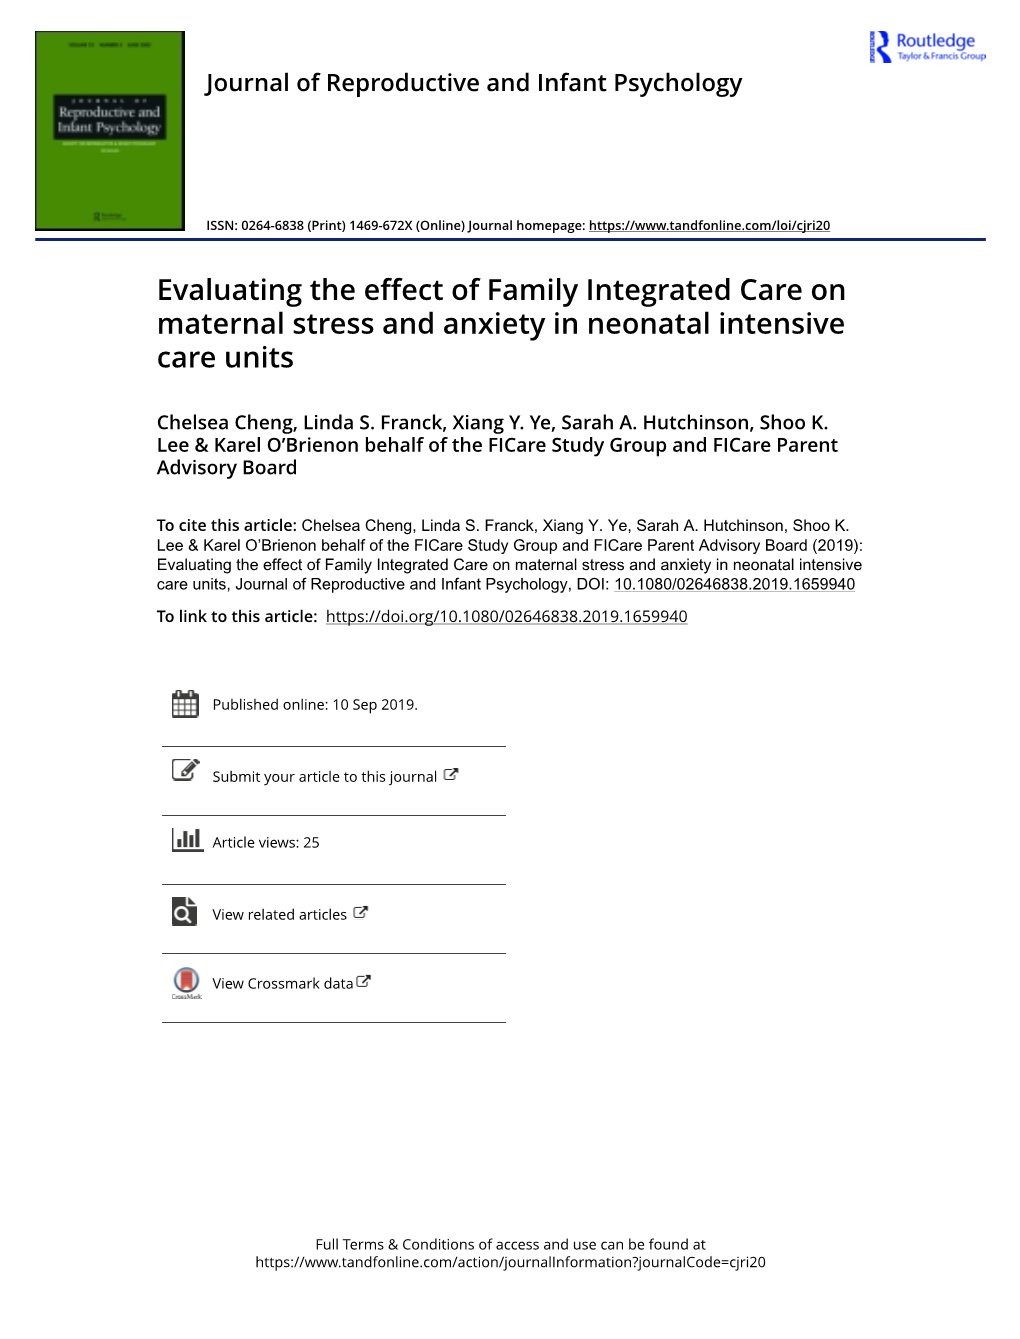 Evaluating the Effect of Family Integrated Care on Maternal Stress and Anxiety in Neonatal Intensive Care Units